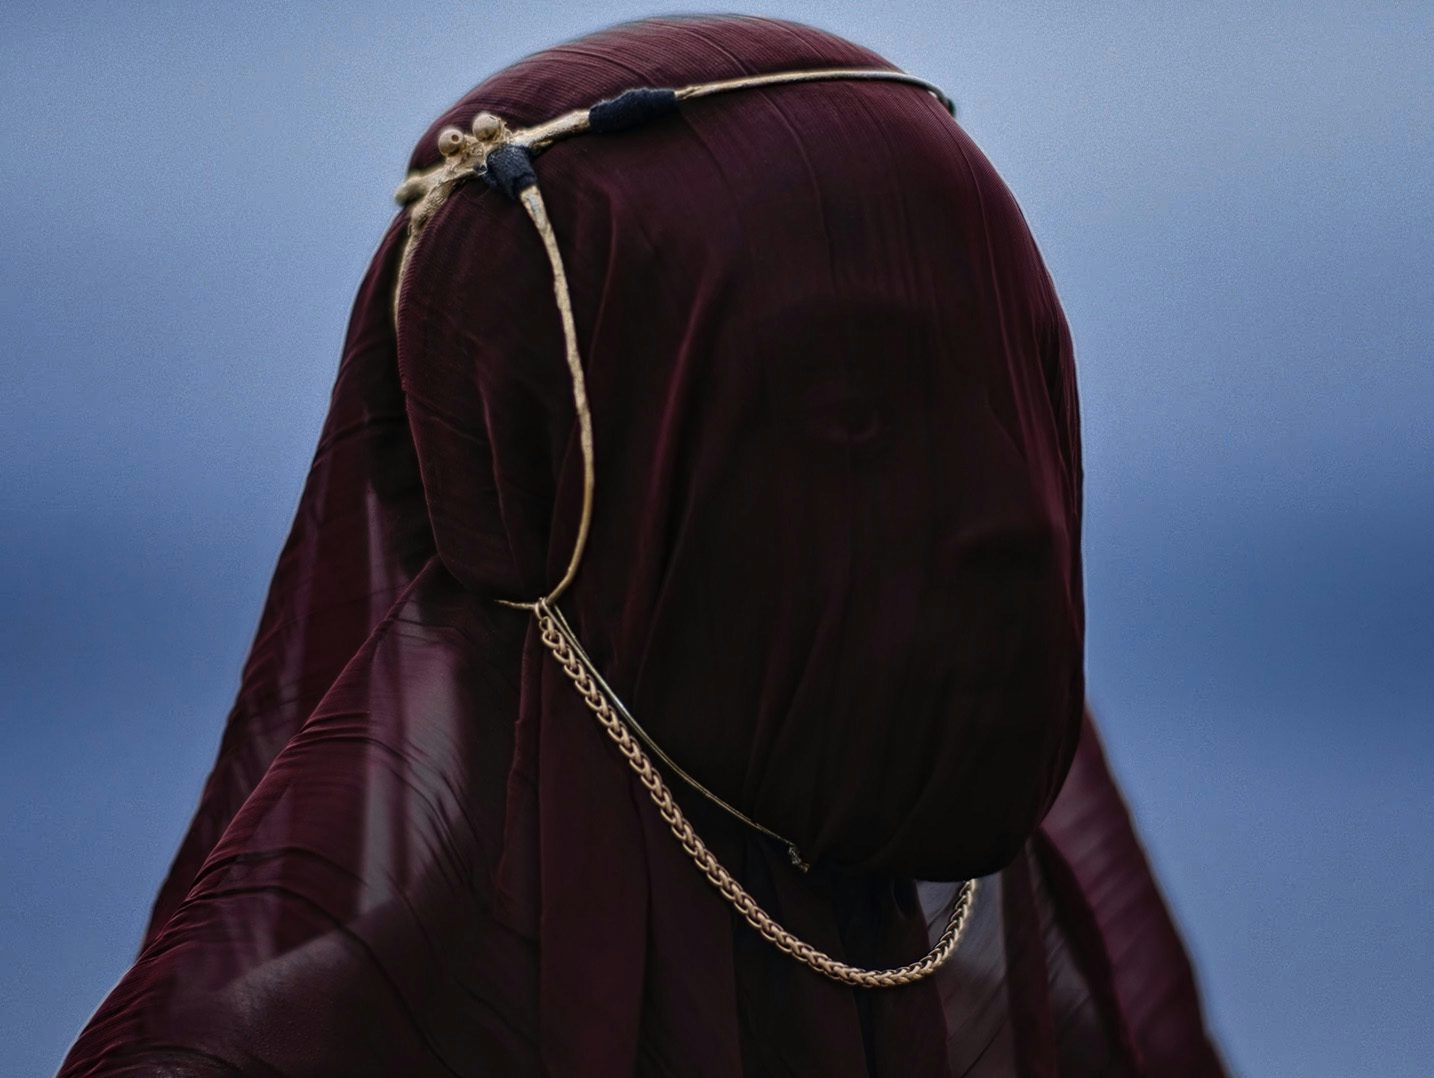 Still image of a person wearing a red headdress in the music video for I Saw by Young Fathers